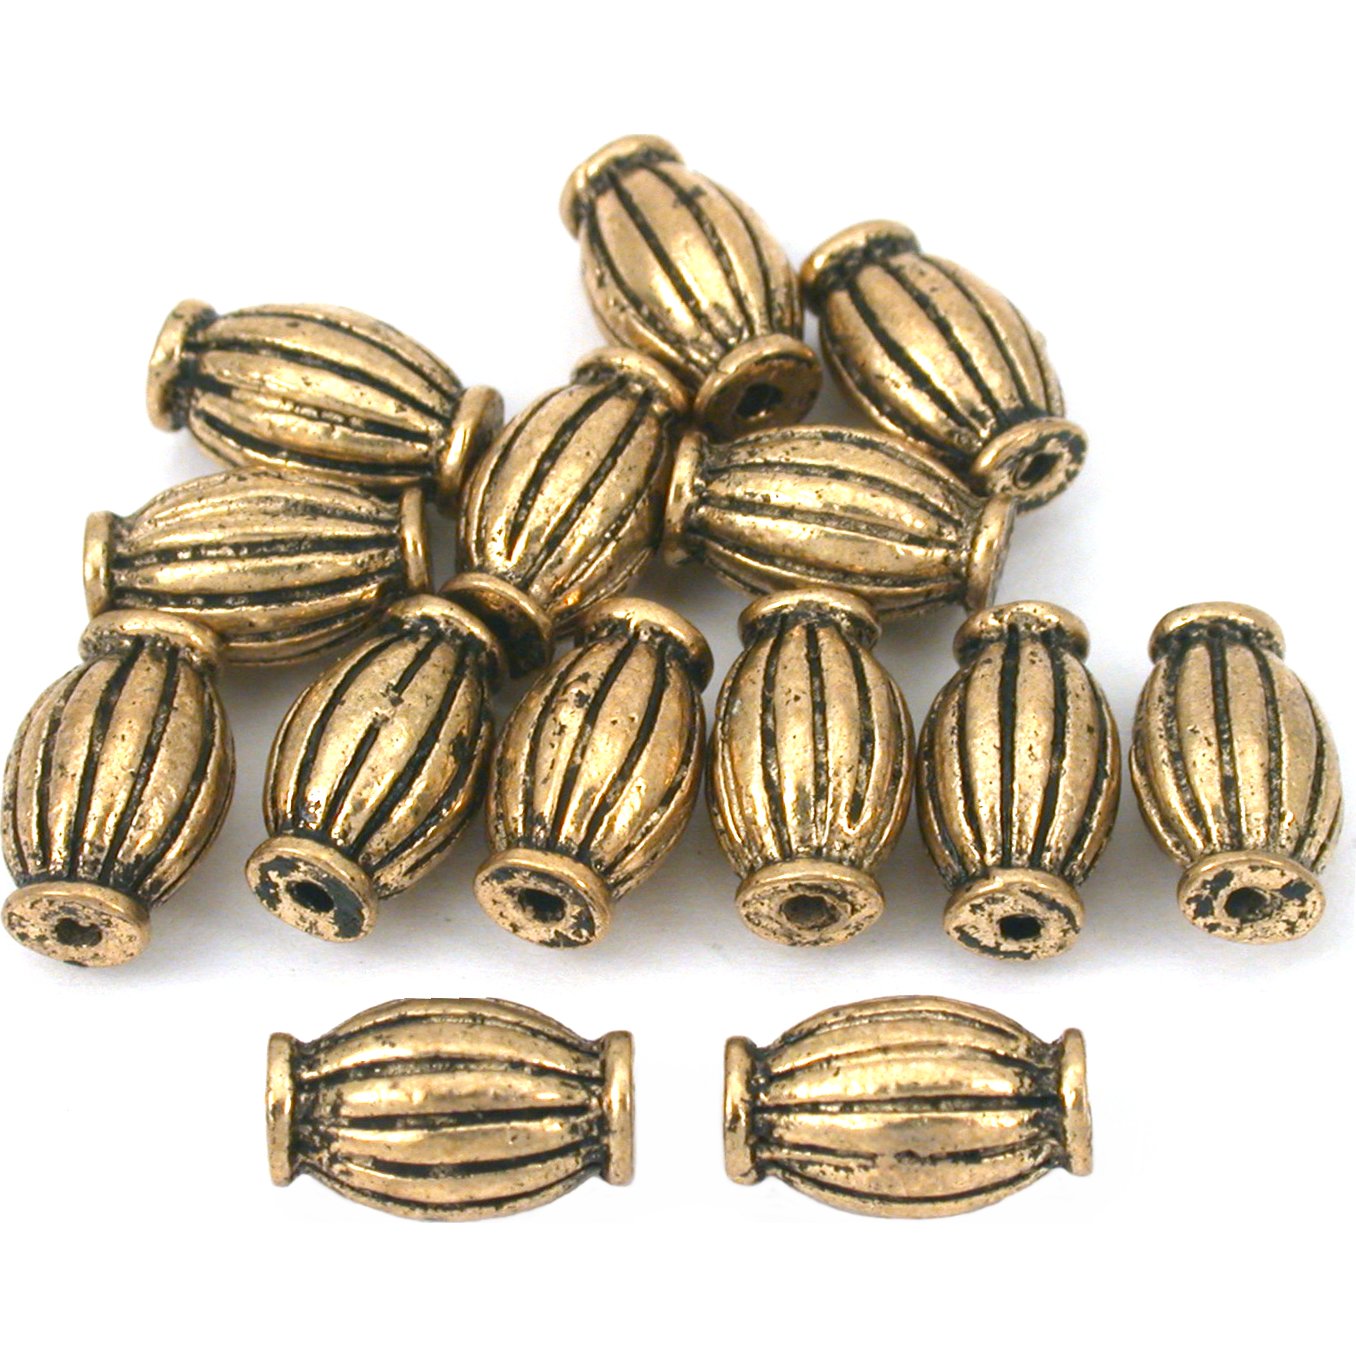 Bali Fluted Tube Antique Gold Plated Beads 9.5mm 14Pcs Approx.